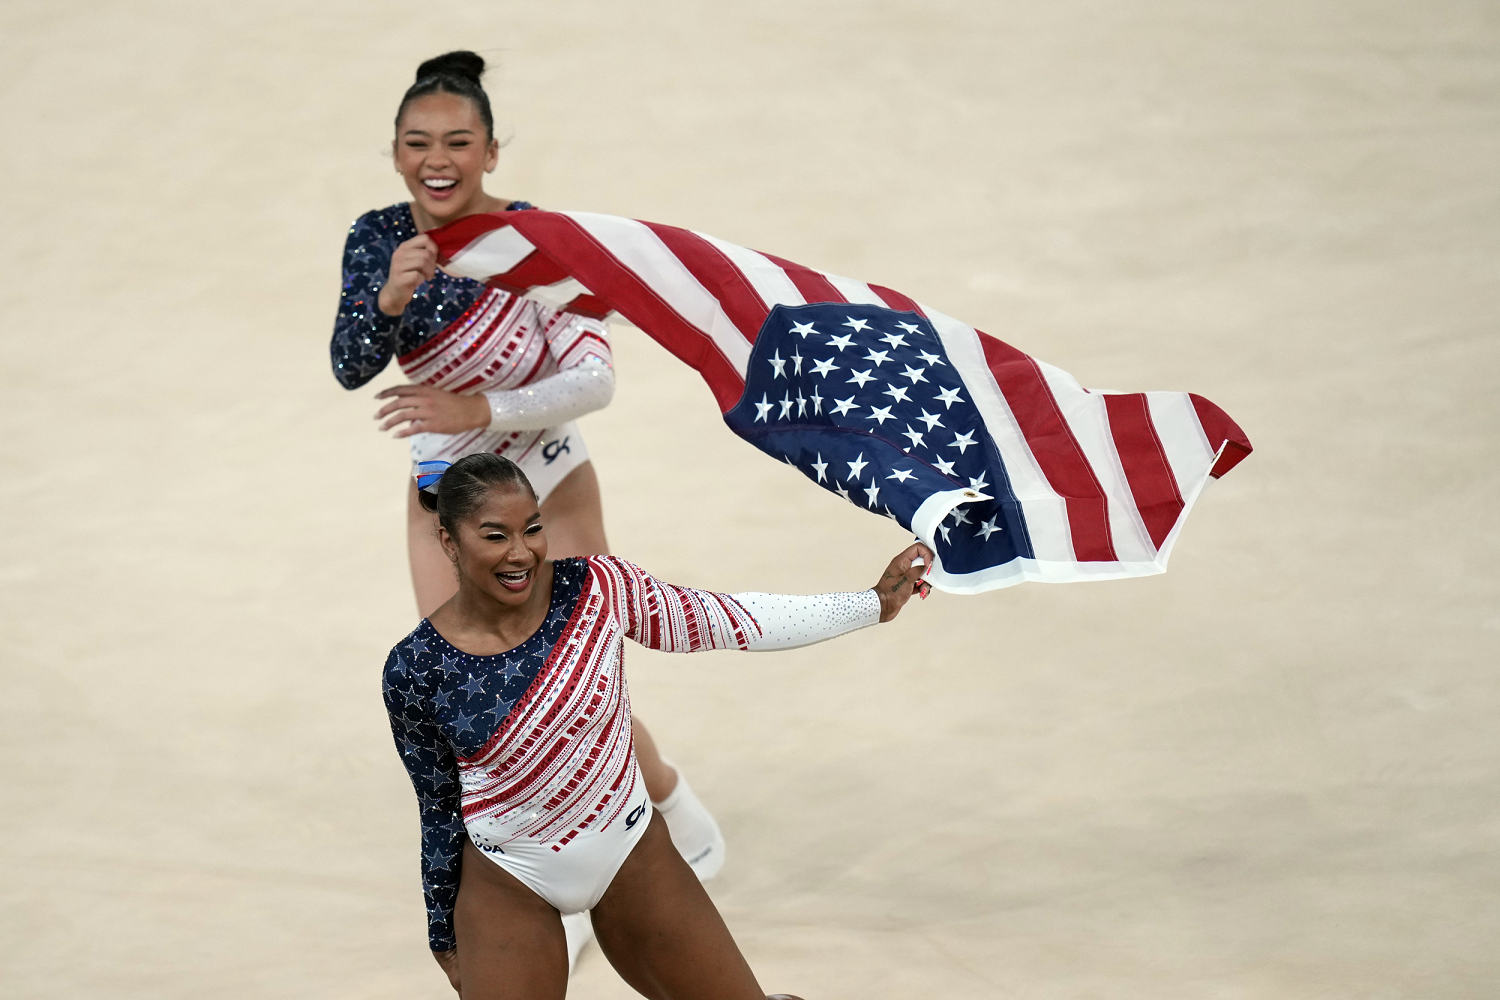 Suni Lee and Jordan Chiles talk about the joy in their Olympic encore